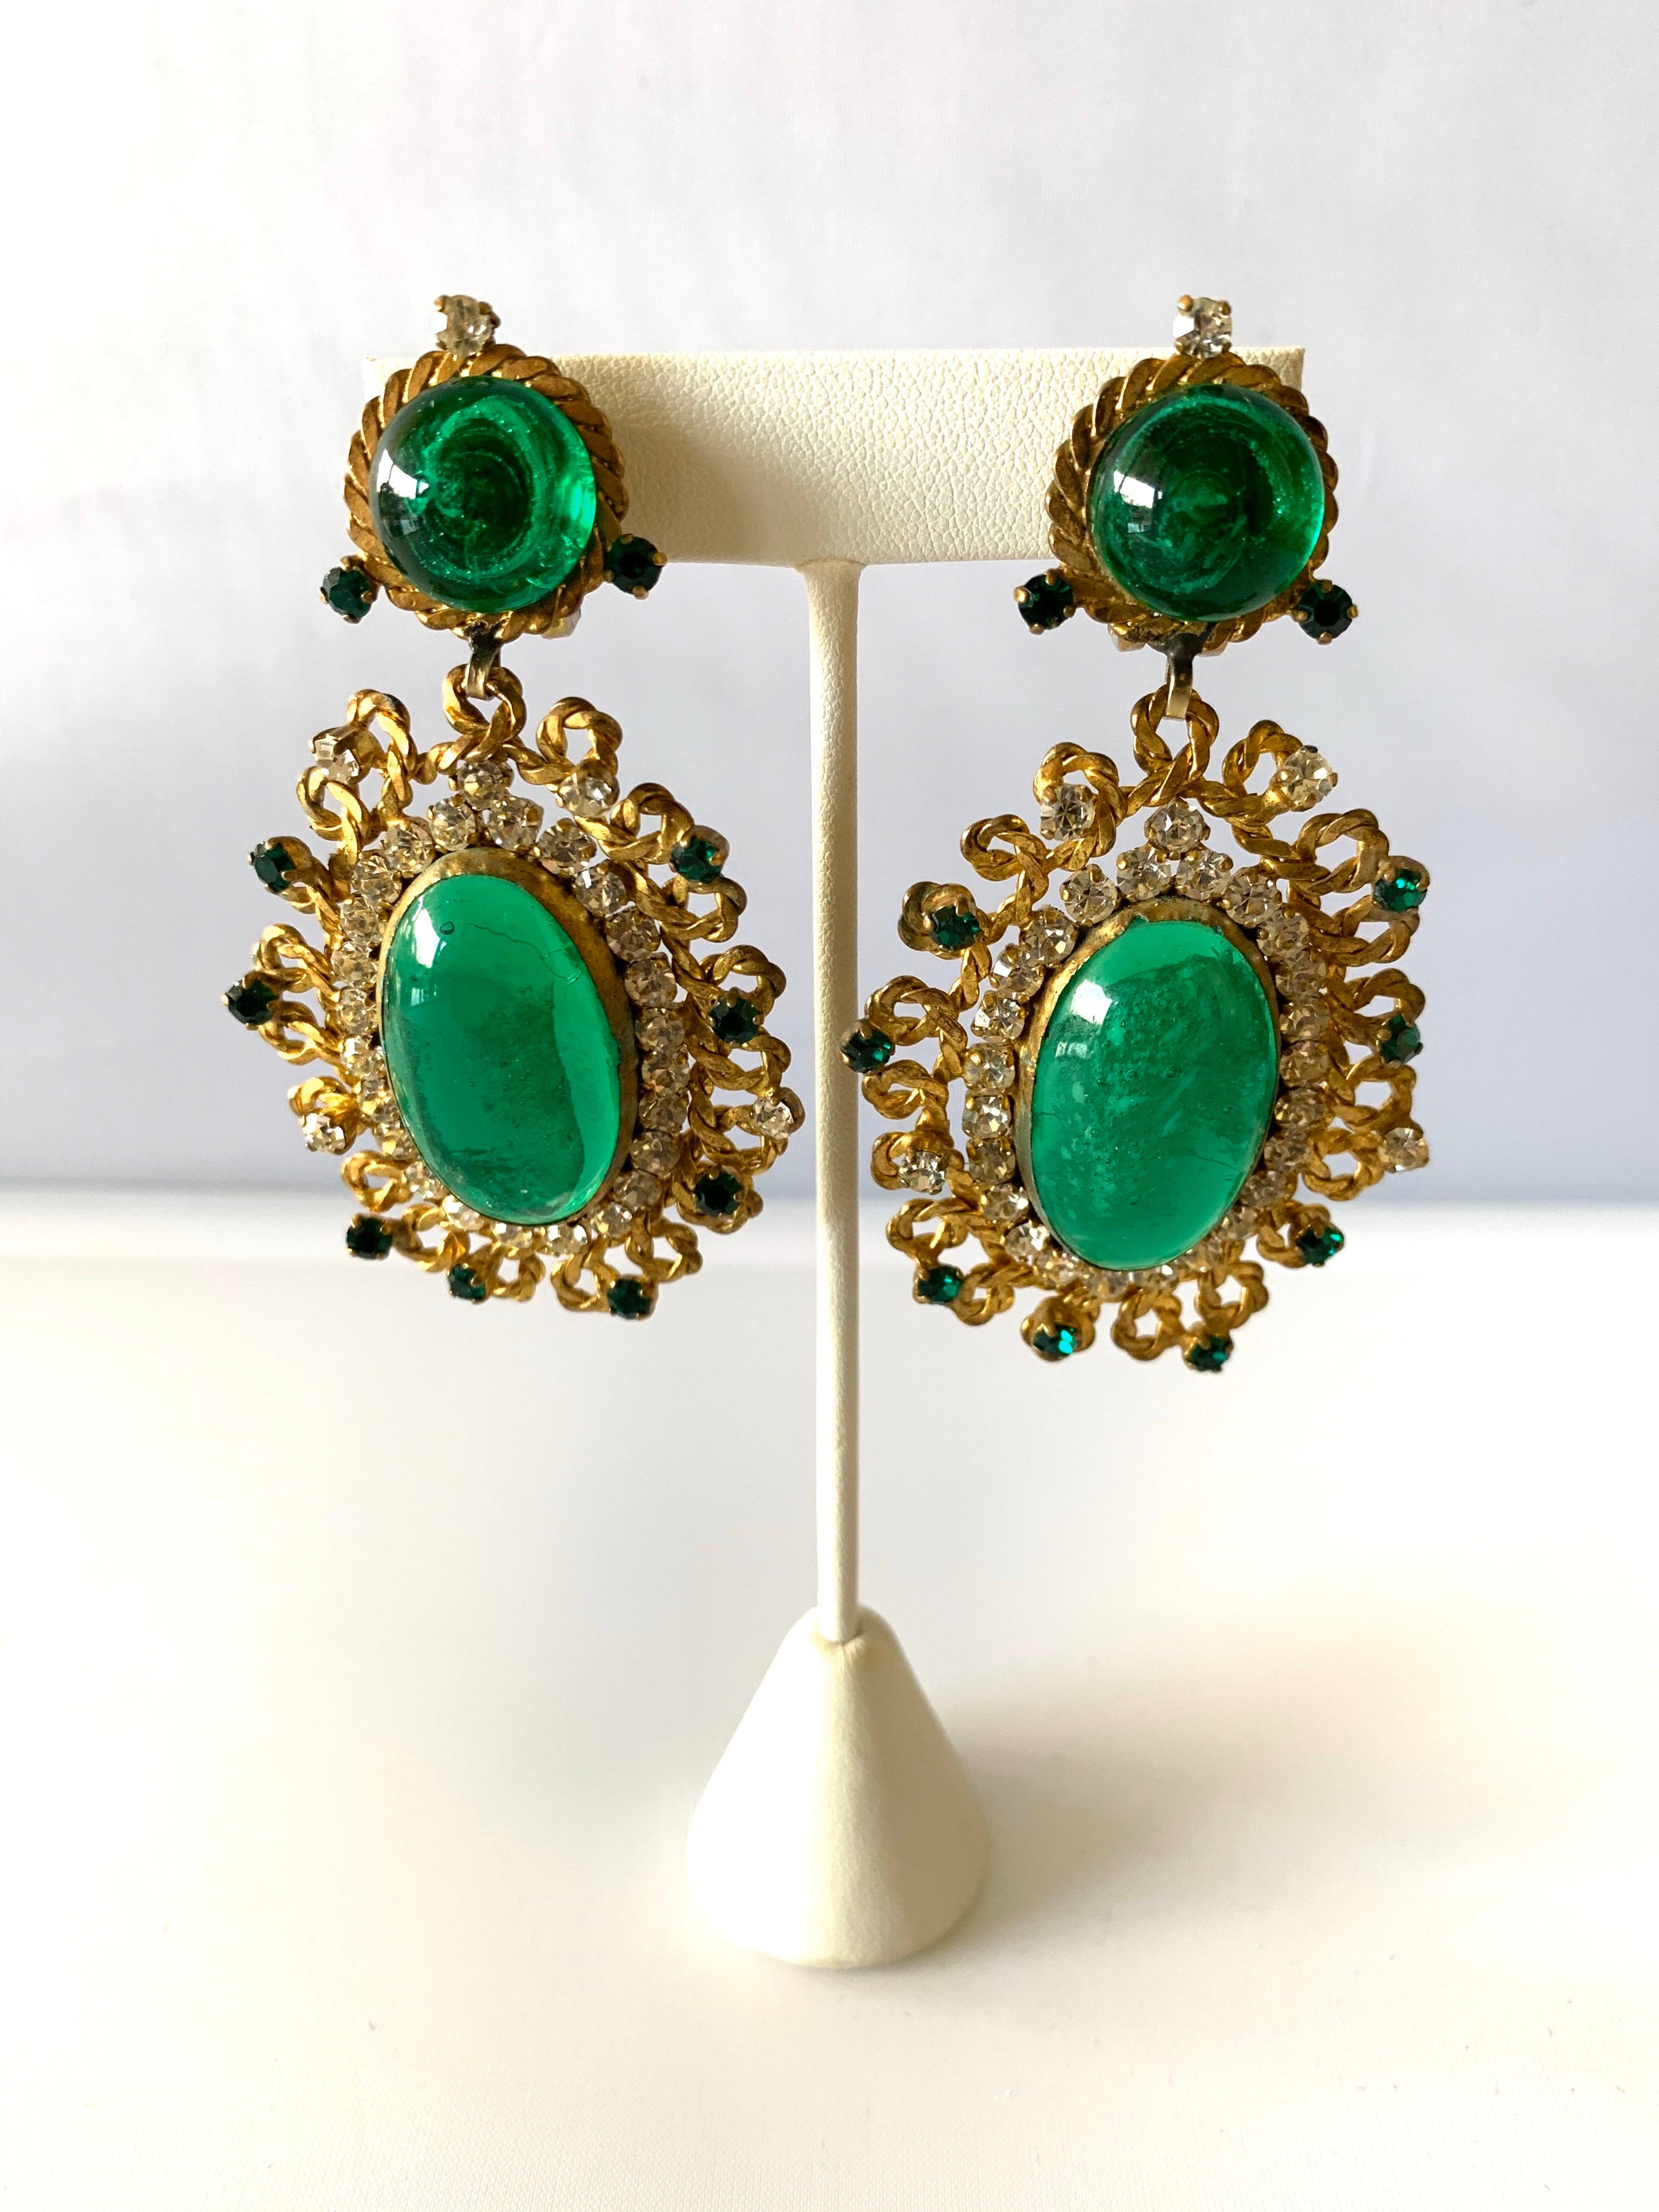 Baroque Exceptional Emerald and Diamante Statement Earrings by Maison Gripoix for Chanel